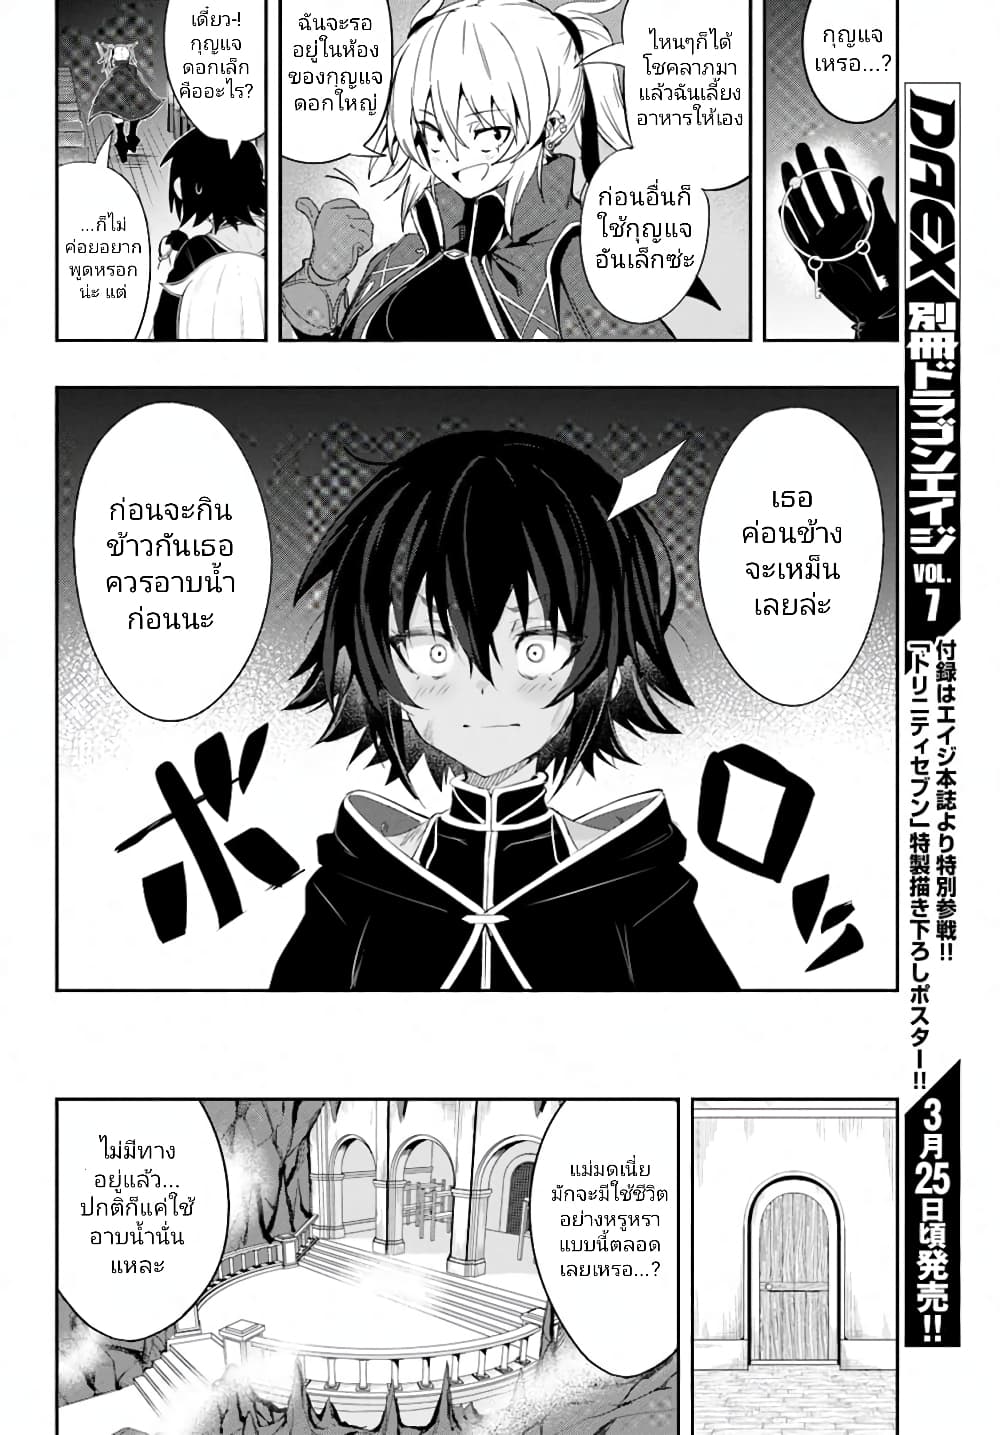 Witch Guild Fantasia 5 (15)